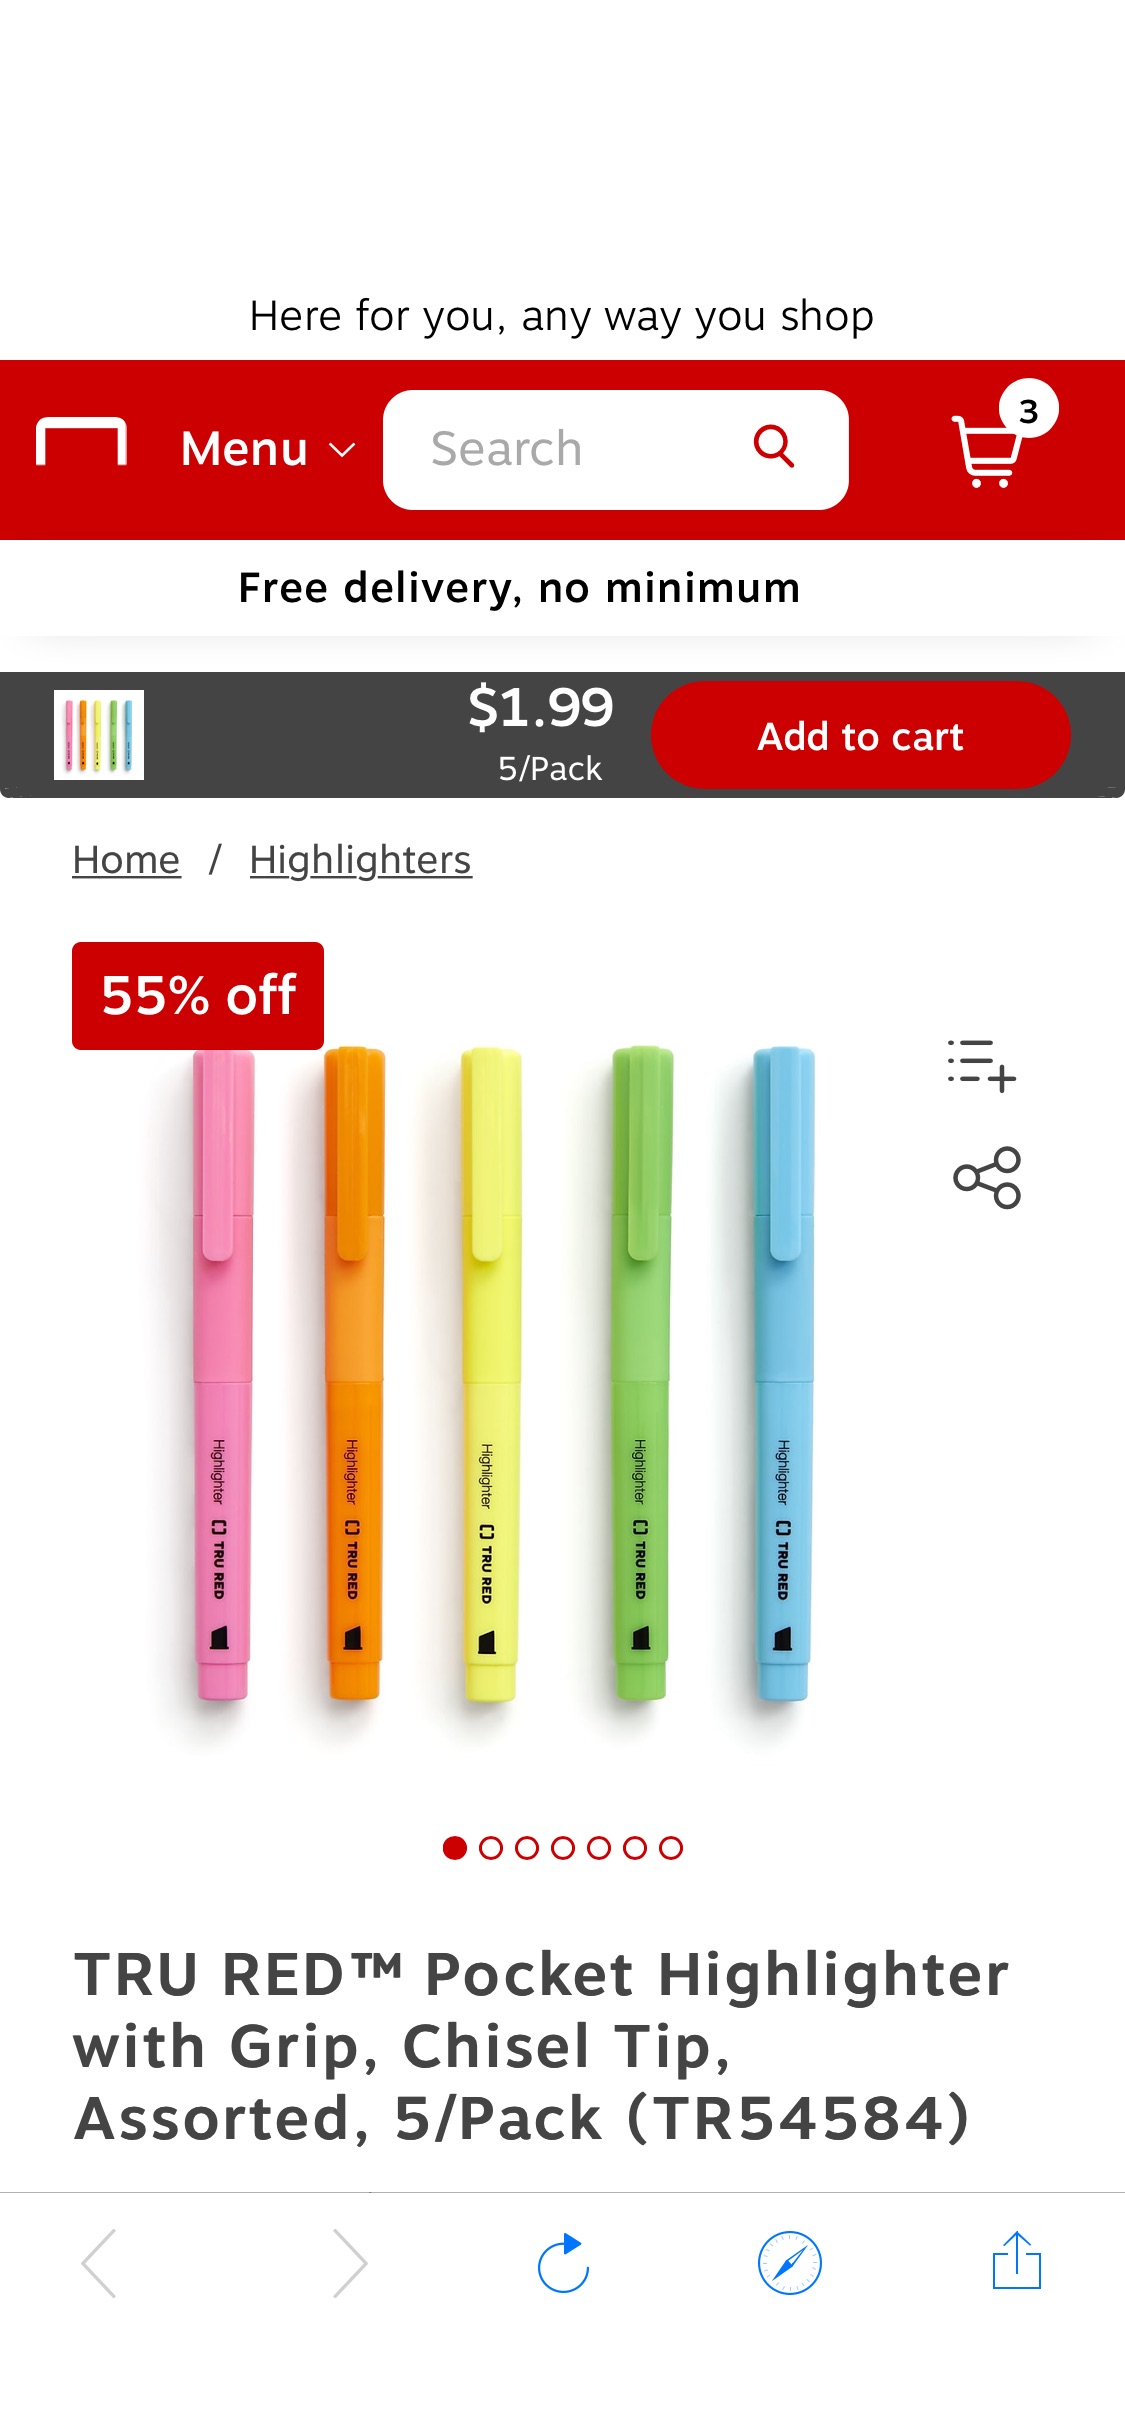 TRU RED™ Pocket Highlighter with Grip, Chisel Tip, Assorted, 5/Pack (TR54584) at Staples彩笔